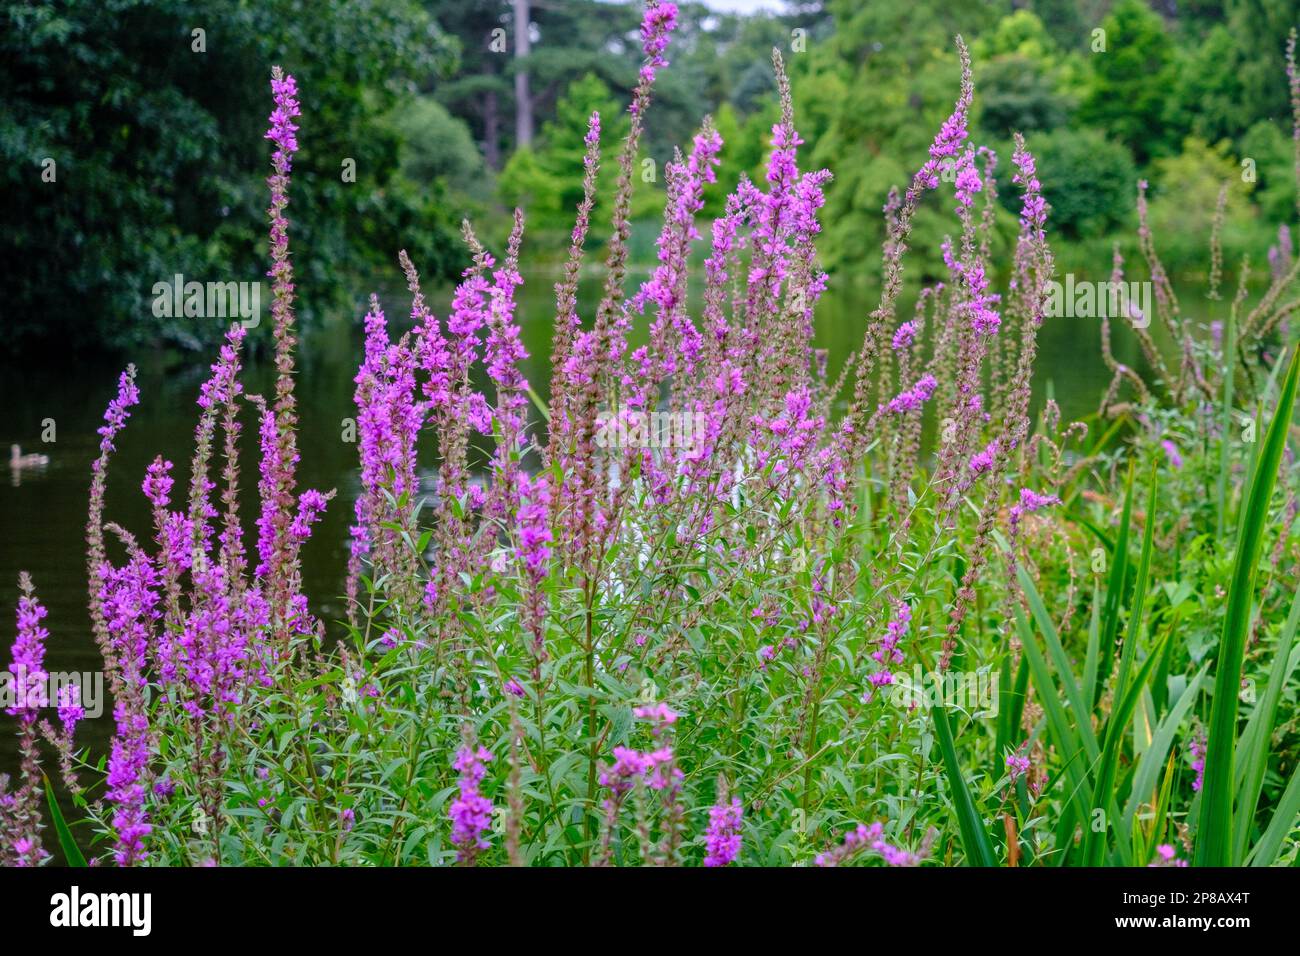 Close-up of purple loosestrife flowers, a hardy herbaceous perennial native to the British Isles with sky and trees in background. Stock Photo